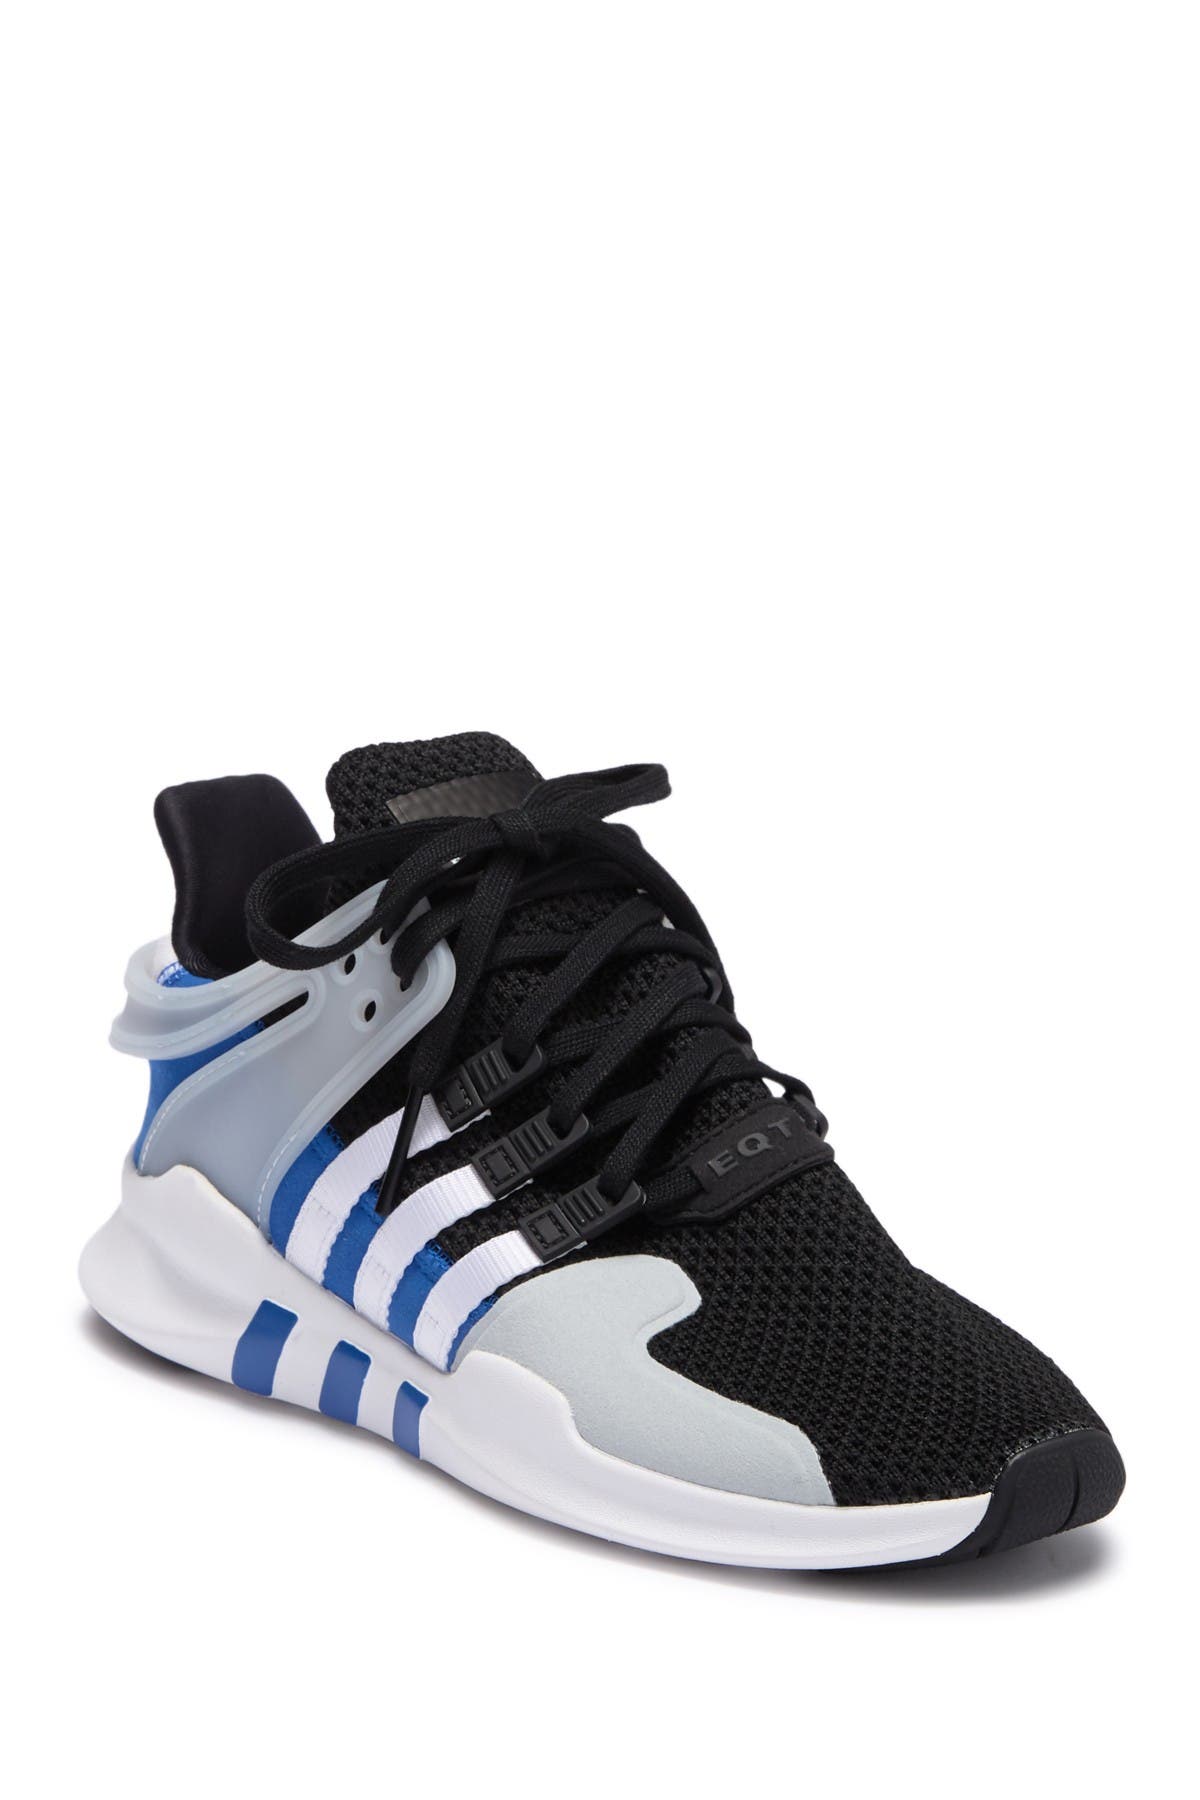 eqt support adv sneakers